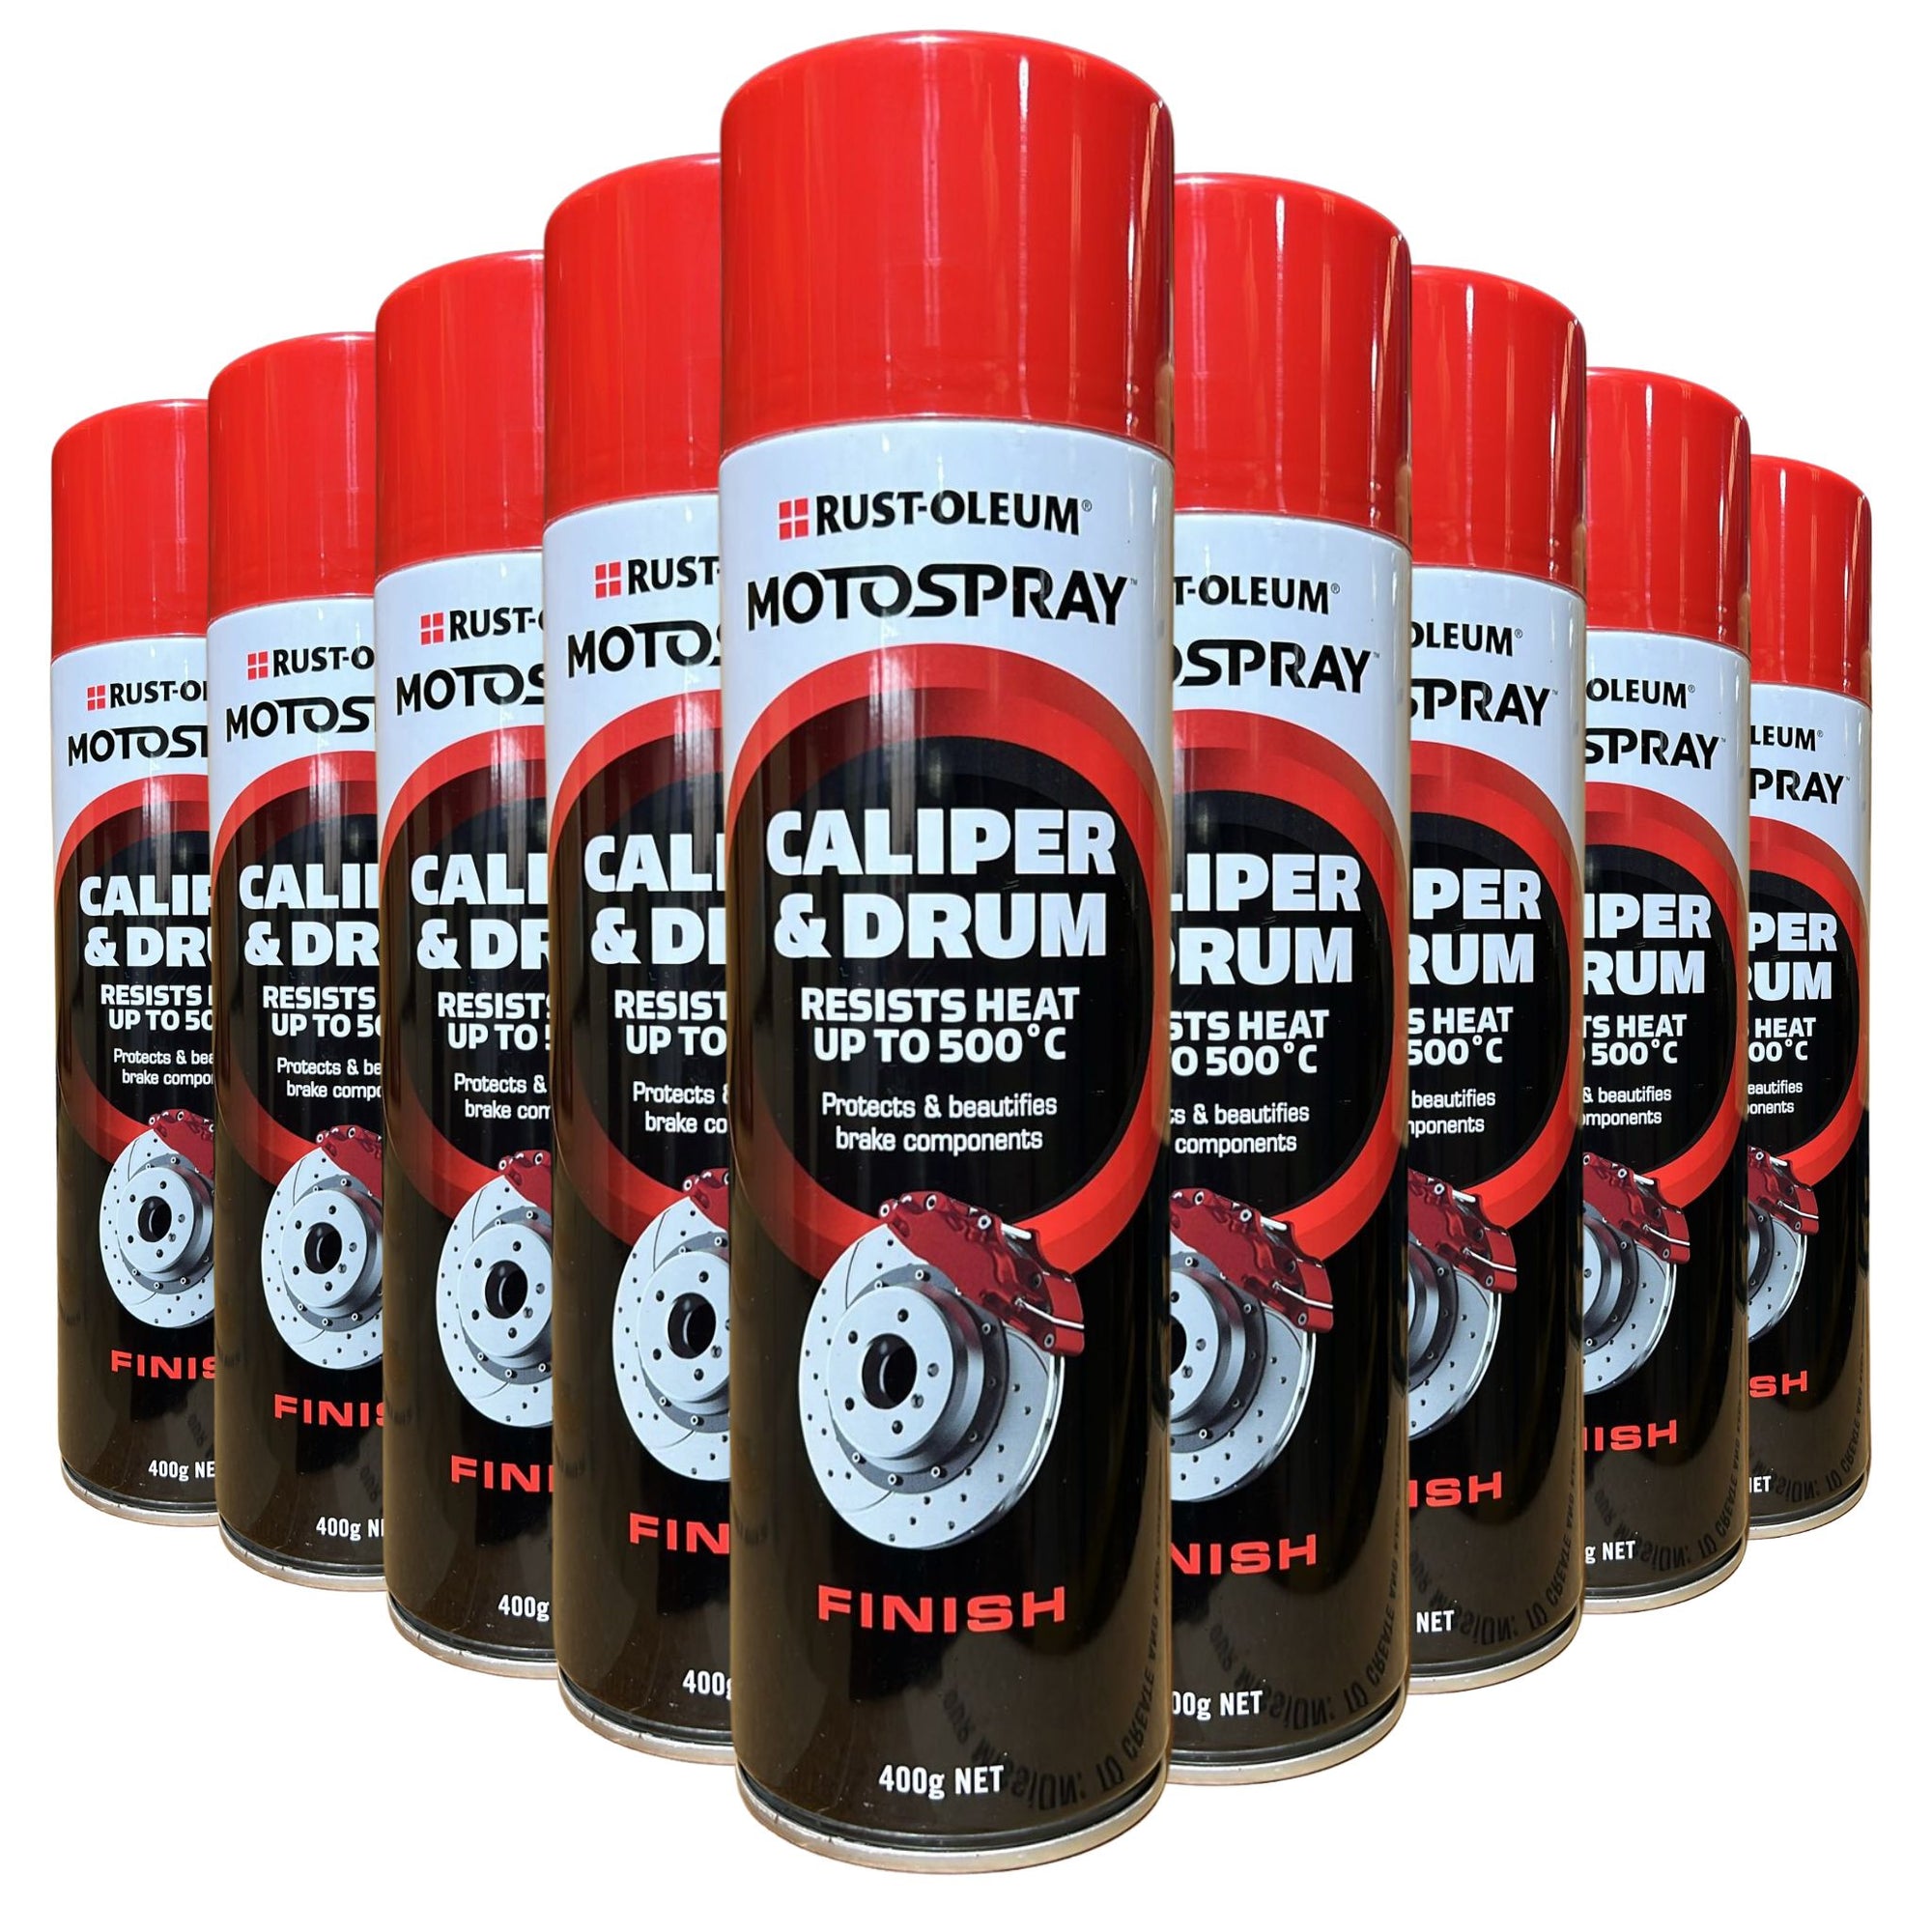 Rust-Oleum High Heat Spray Paint Caliper & Drum, 12 Cans (Flame Red) - South East Clearance Centre